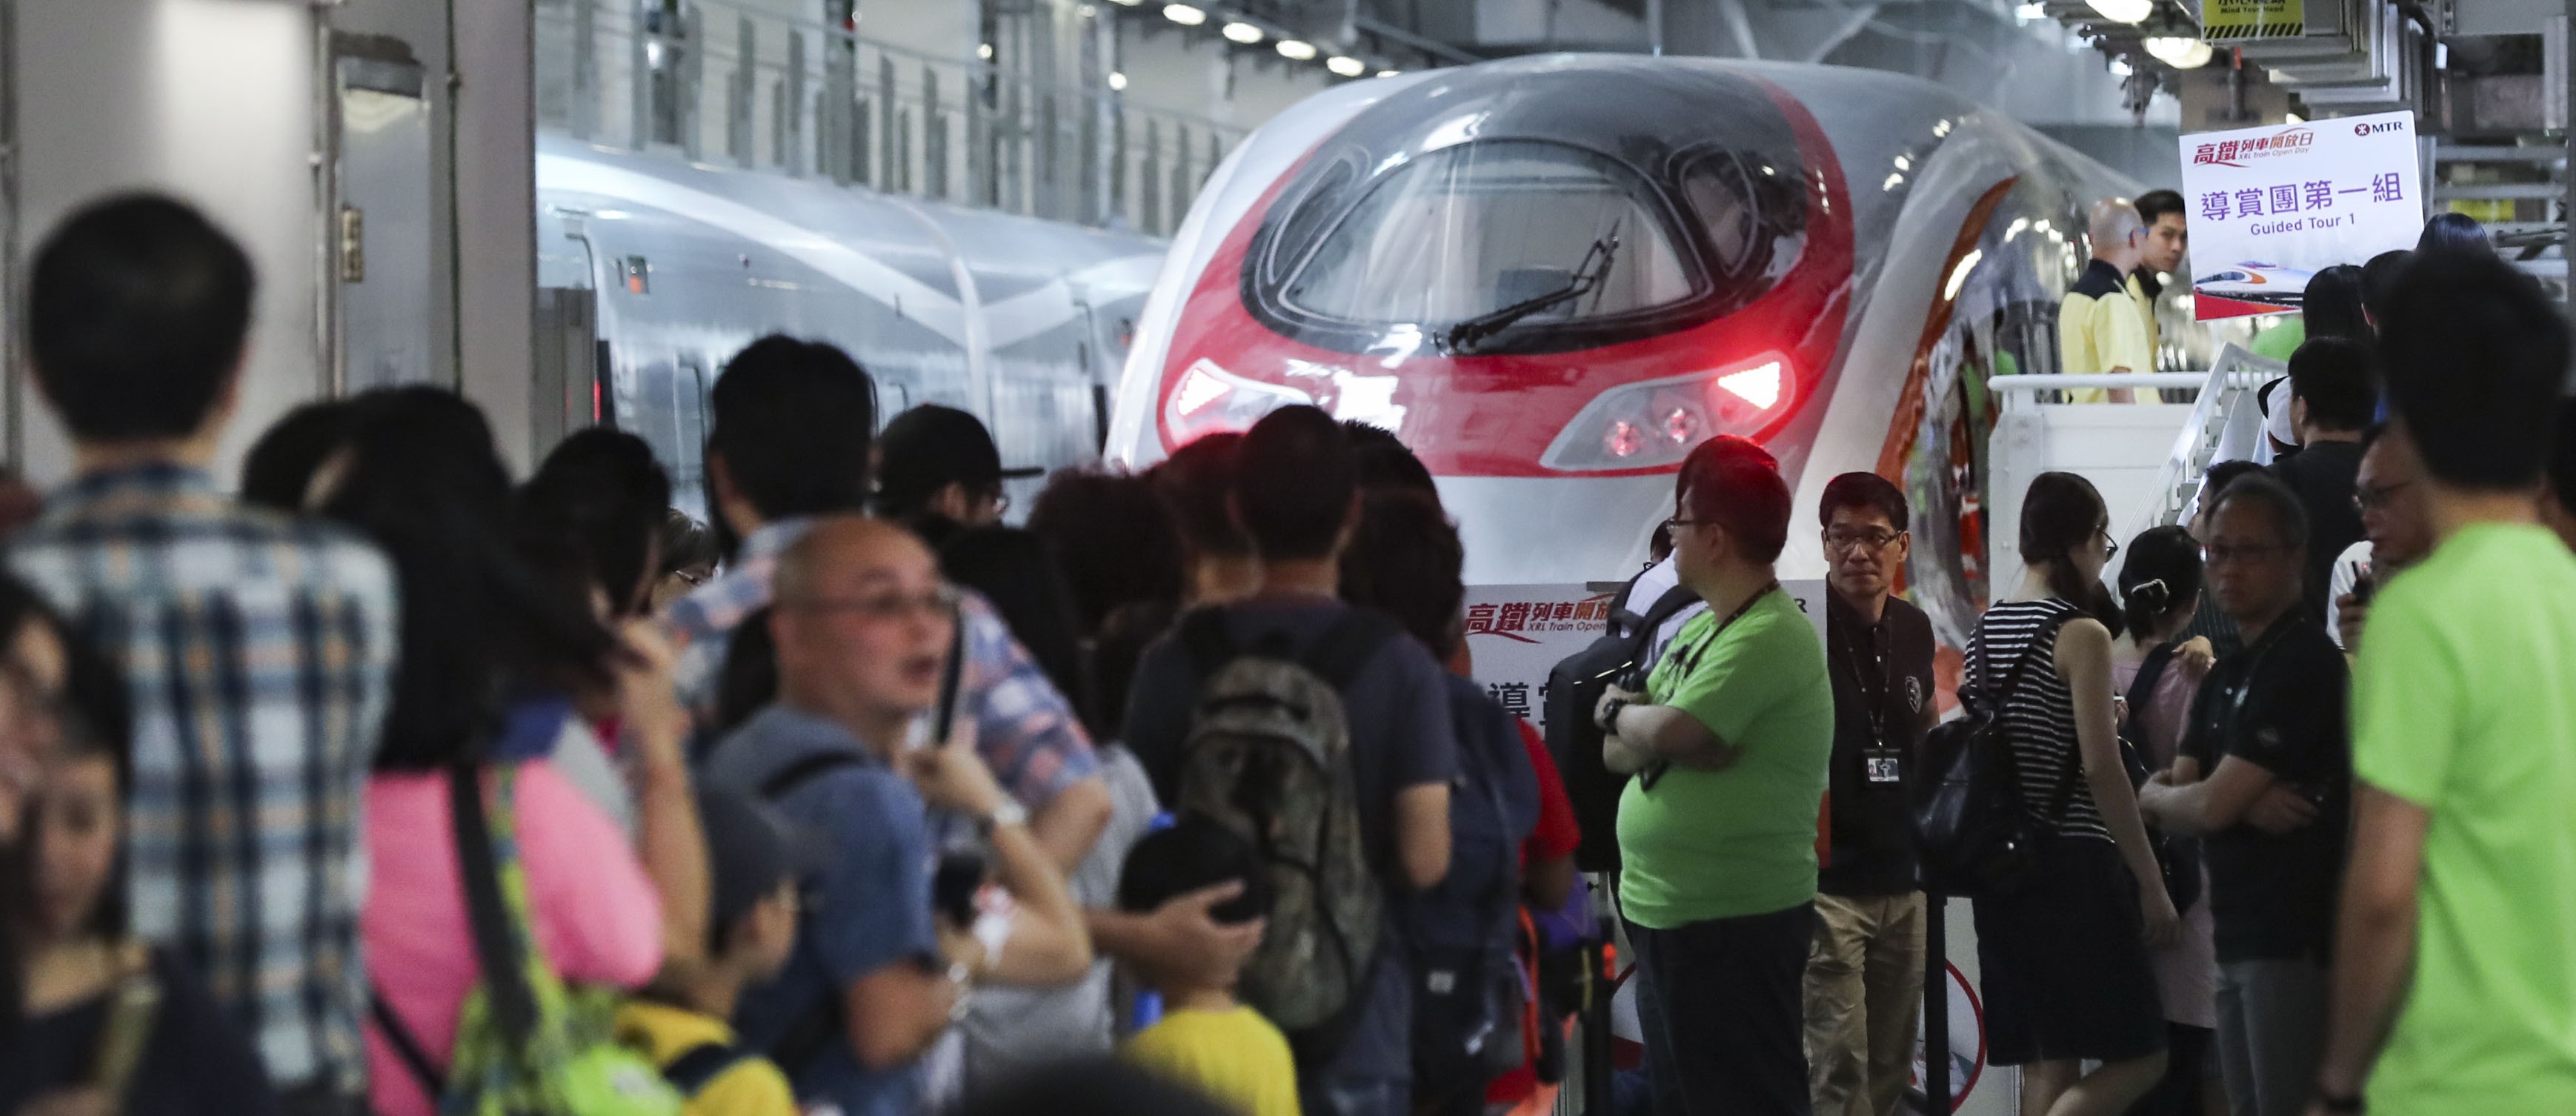 Members of the public get their first glimpse of the high-speed trains in Yuen Long. Photo: Edward Wong